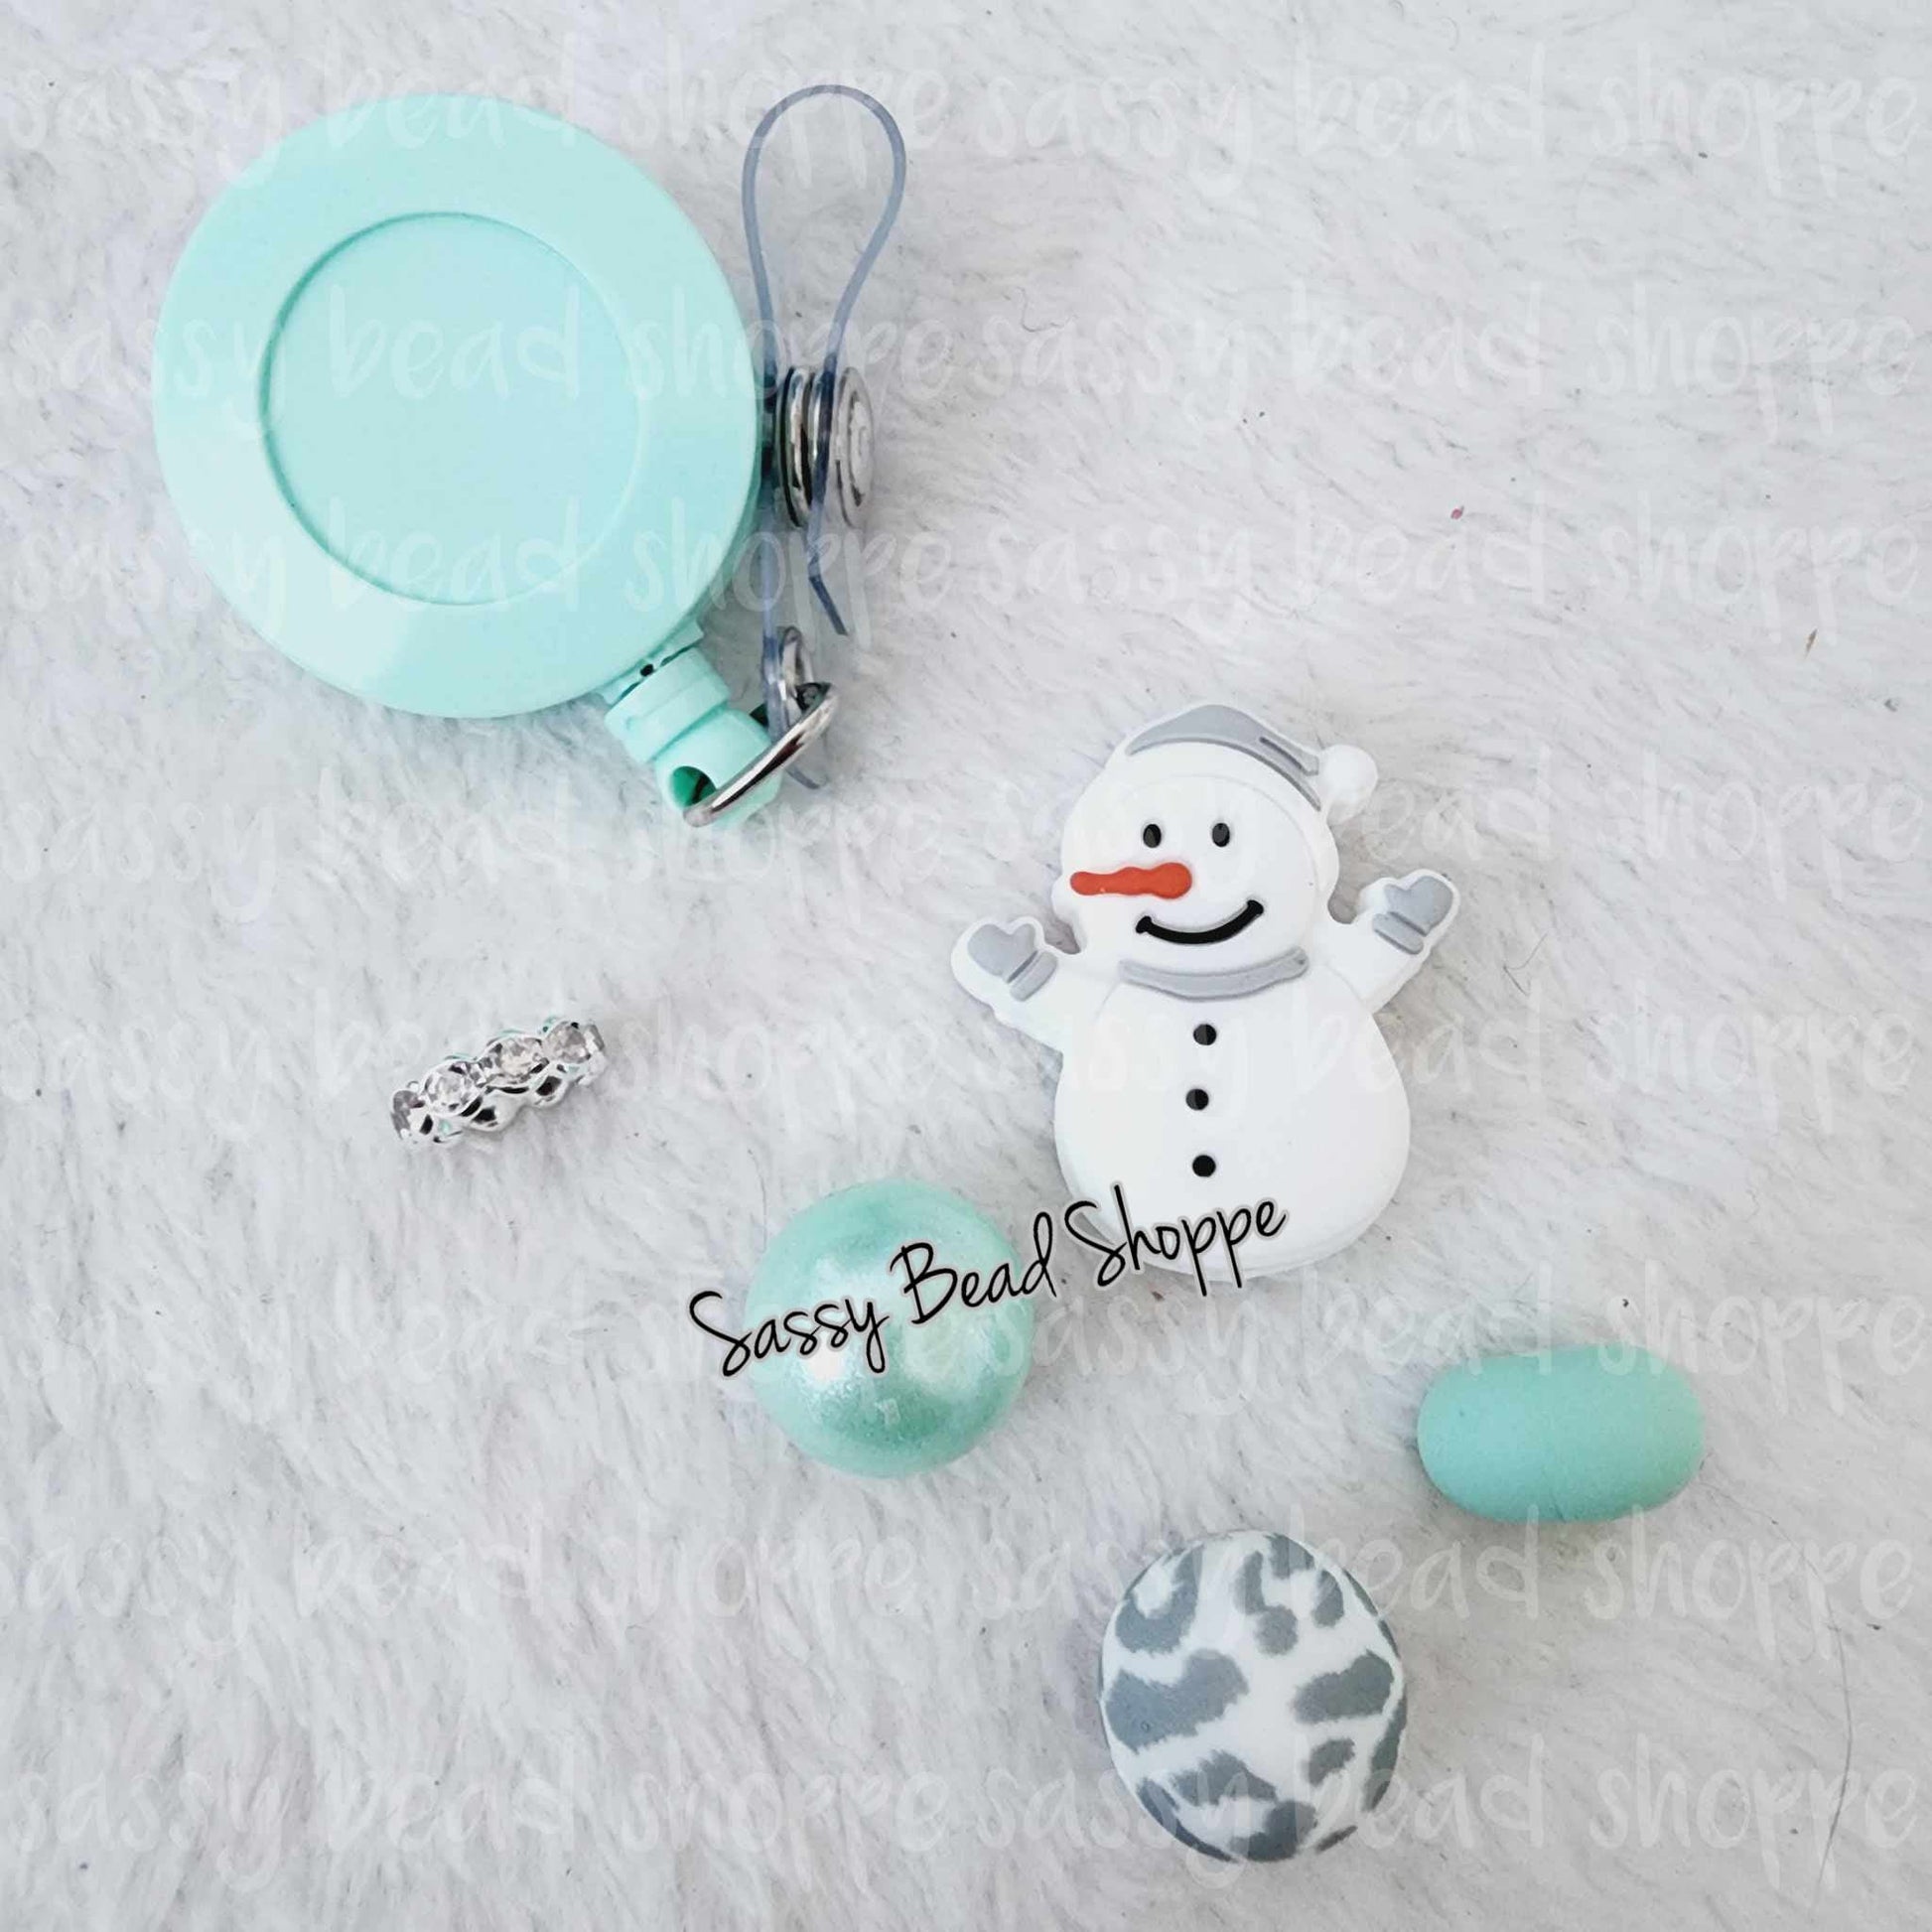 Sassy Bead Shoppe Frost Badge Reel What you will receive in your kit